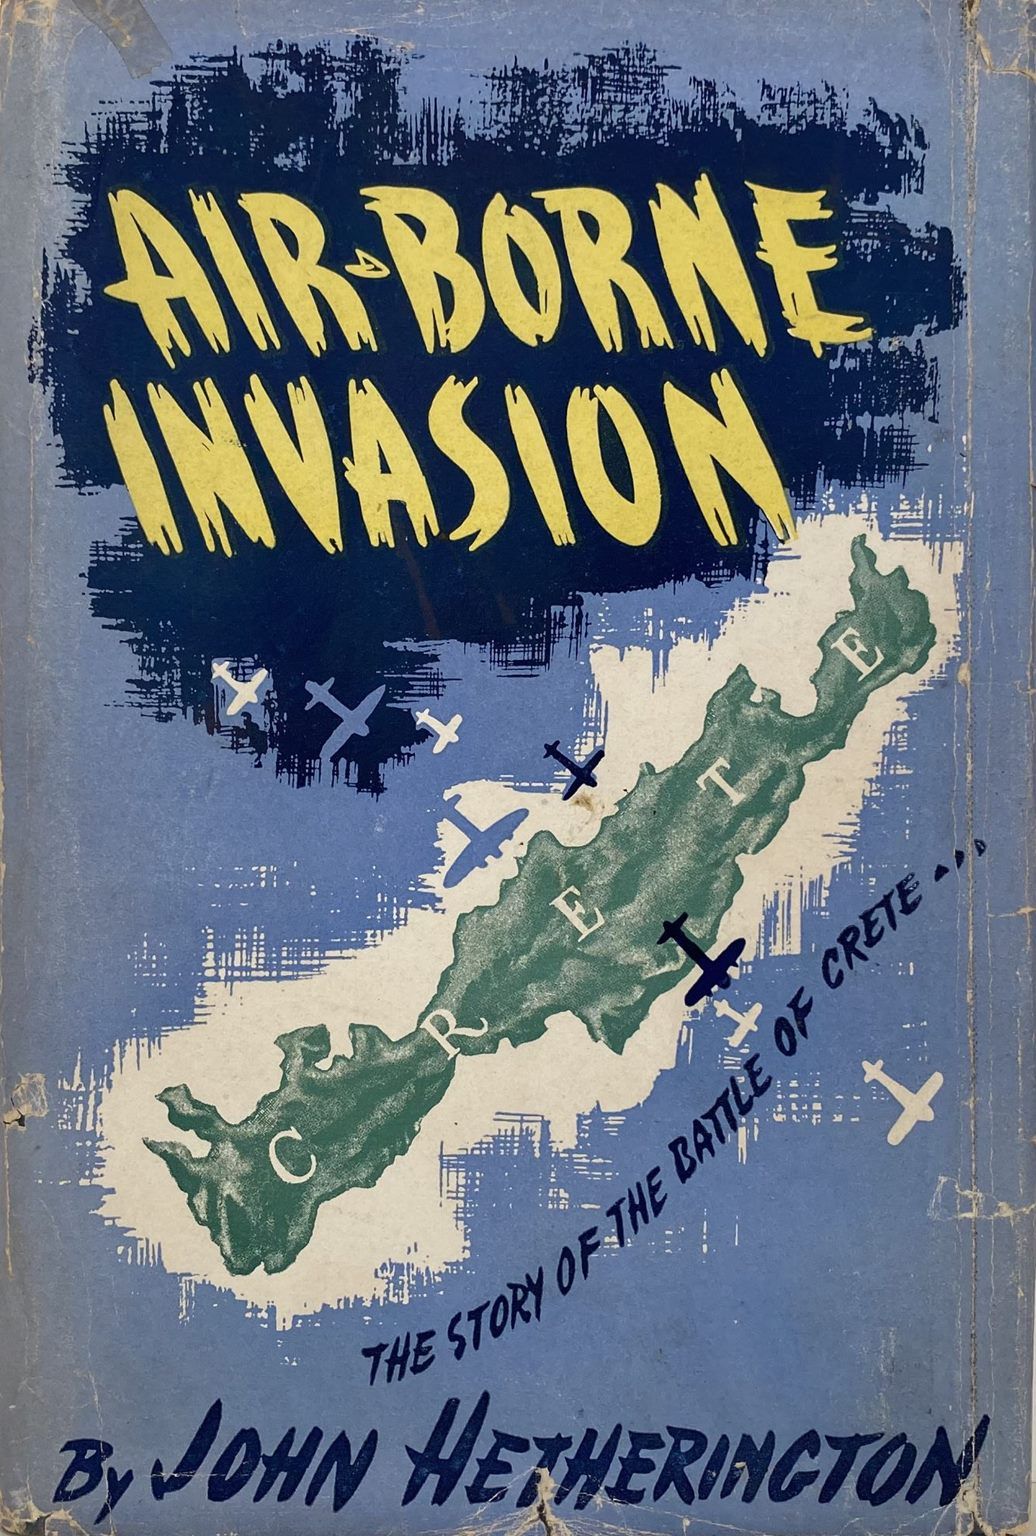 AIR-BORNE INVASION: The Story of the Battle of Crete